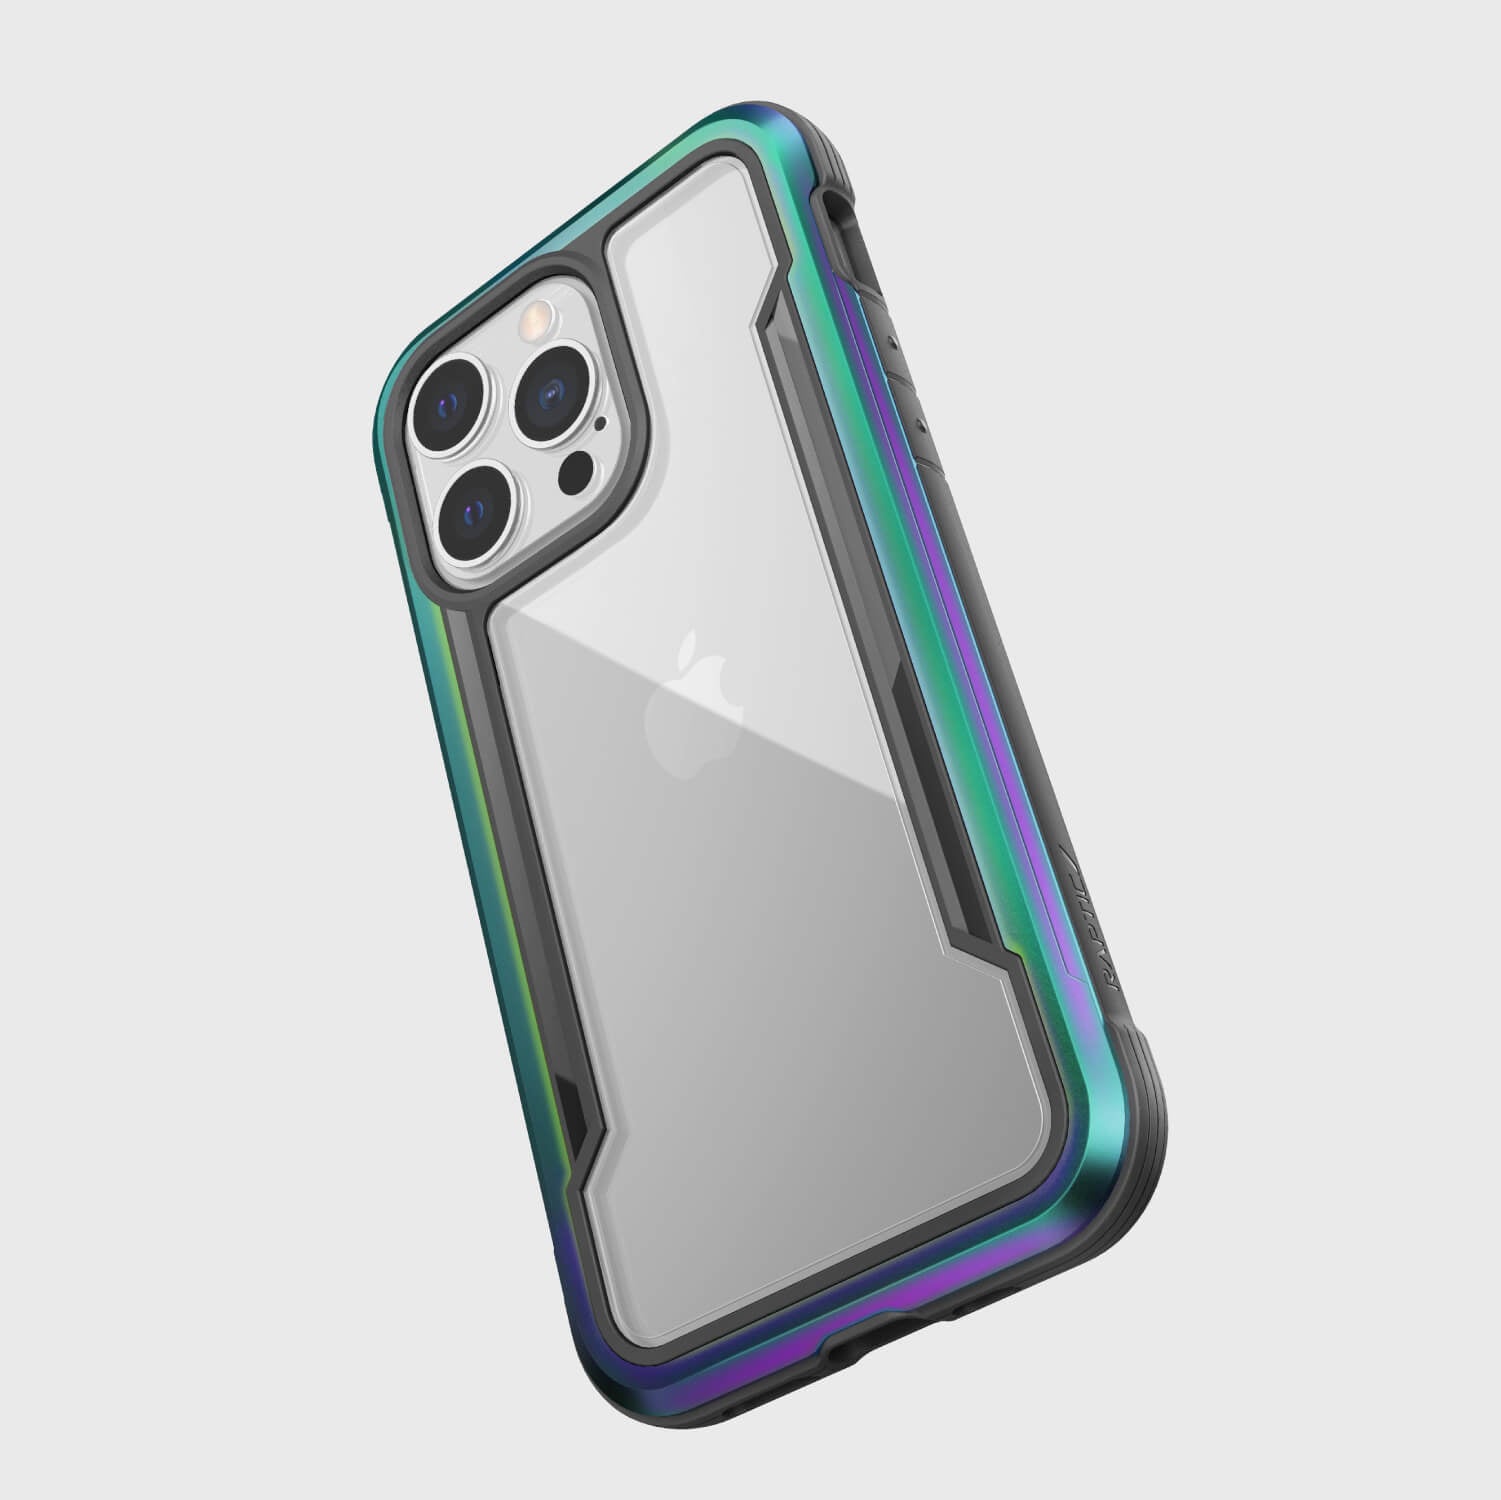 The iPhone 13 Pro case, known as the Raptic SHIELD PRO, is displayed with a vibrant rainbow colored back that offers superior 13 foot drop protection.